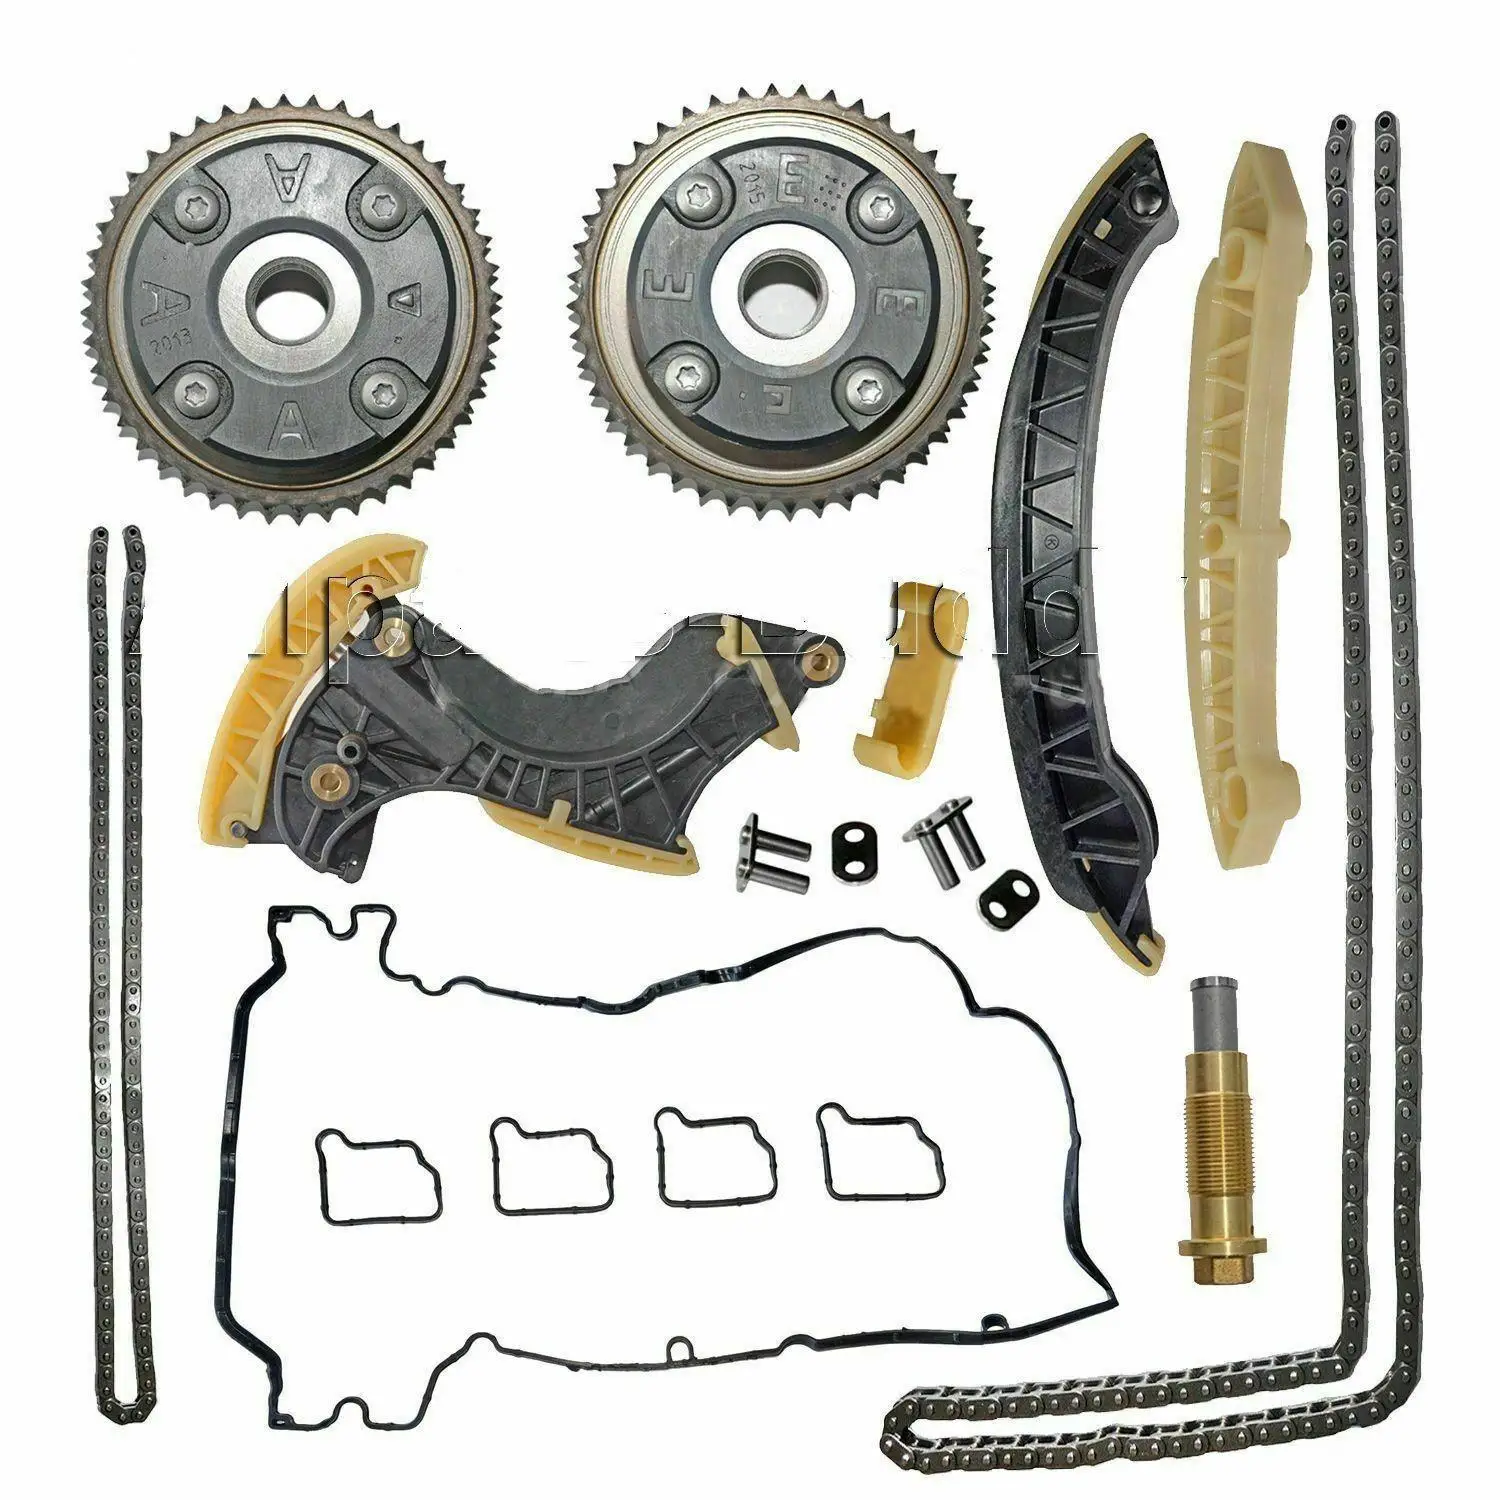 Camshaft Adjusters & VVT Gear & Timing Chain Kit for Mercedes C-Class W204 M271